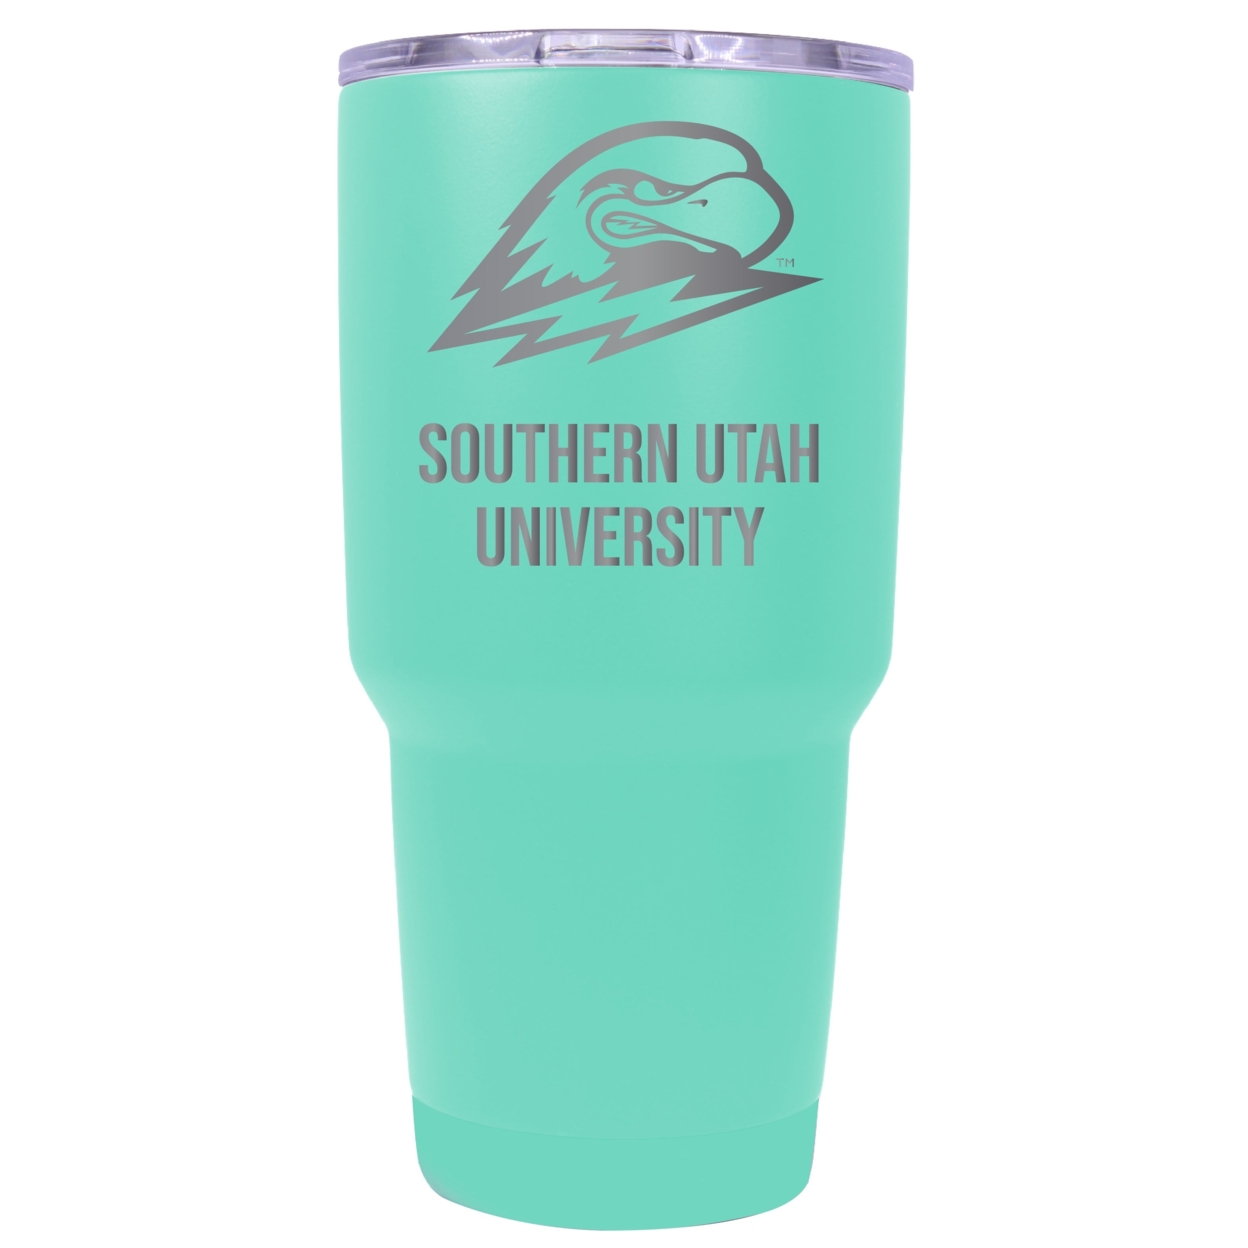 Southern Utah University 24 Oz Laser Engraved Stainless Steel Insulated Tumbler - Choose Your Color. - Red